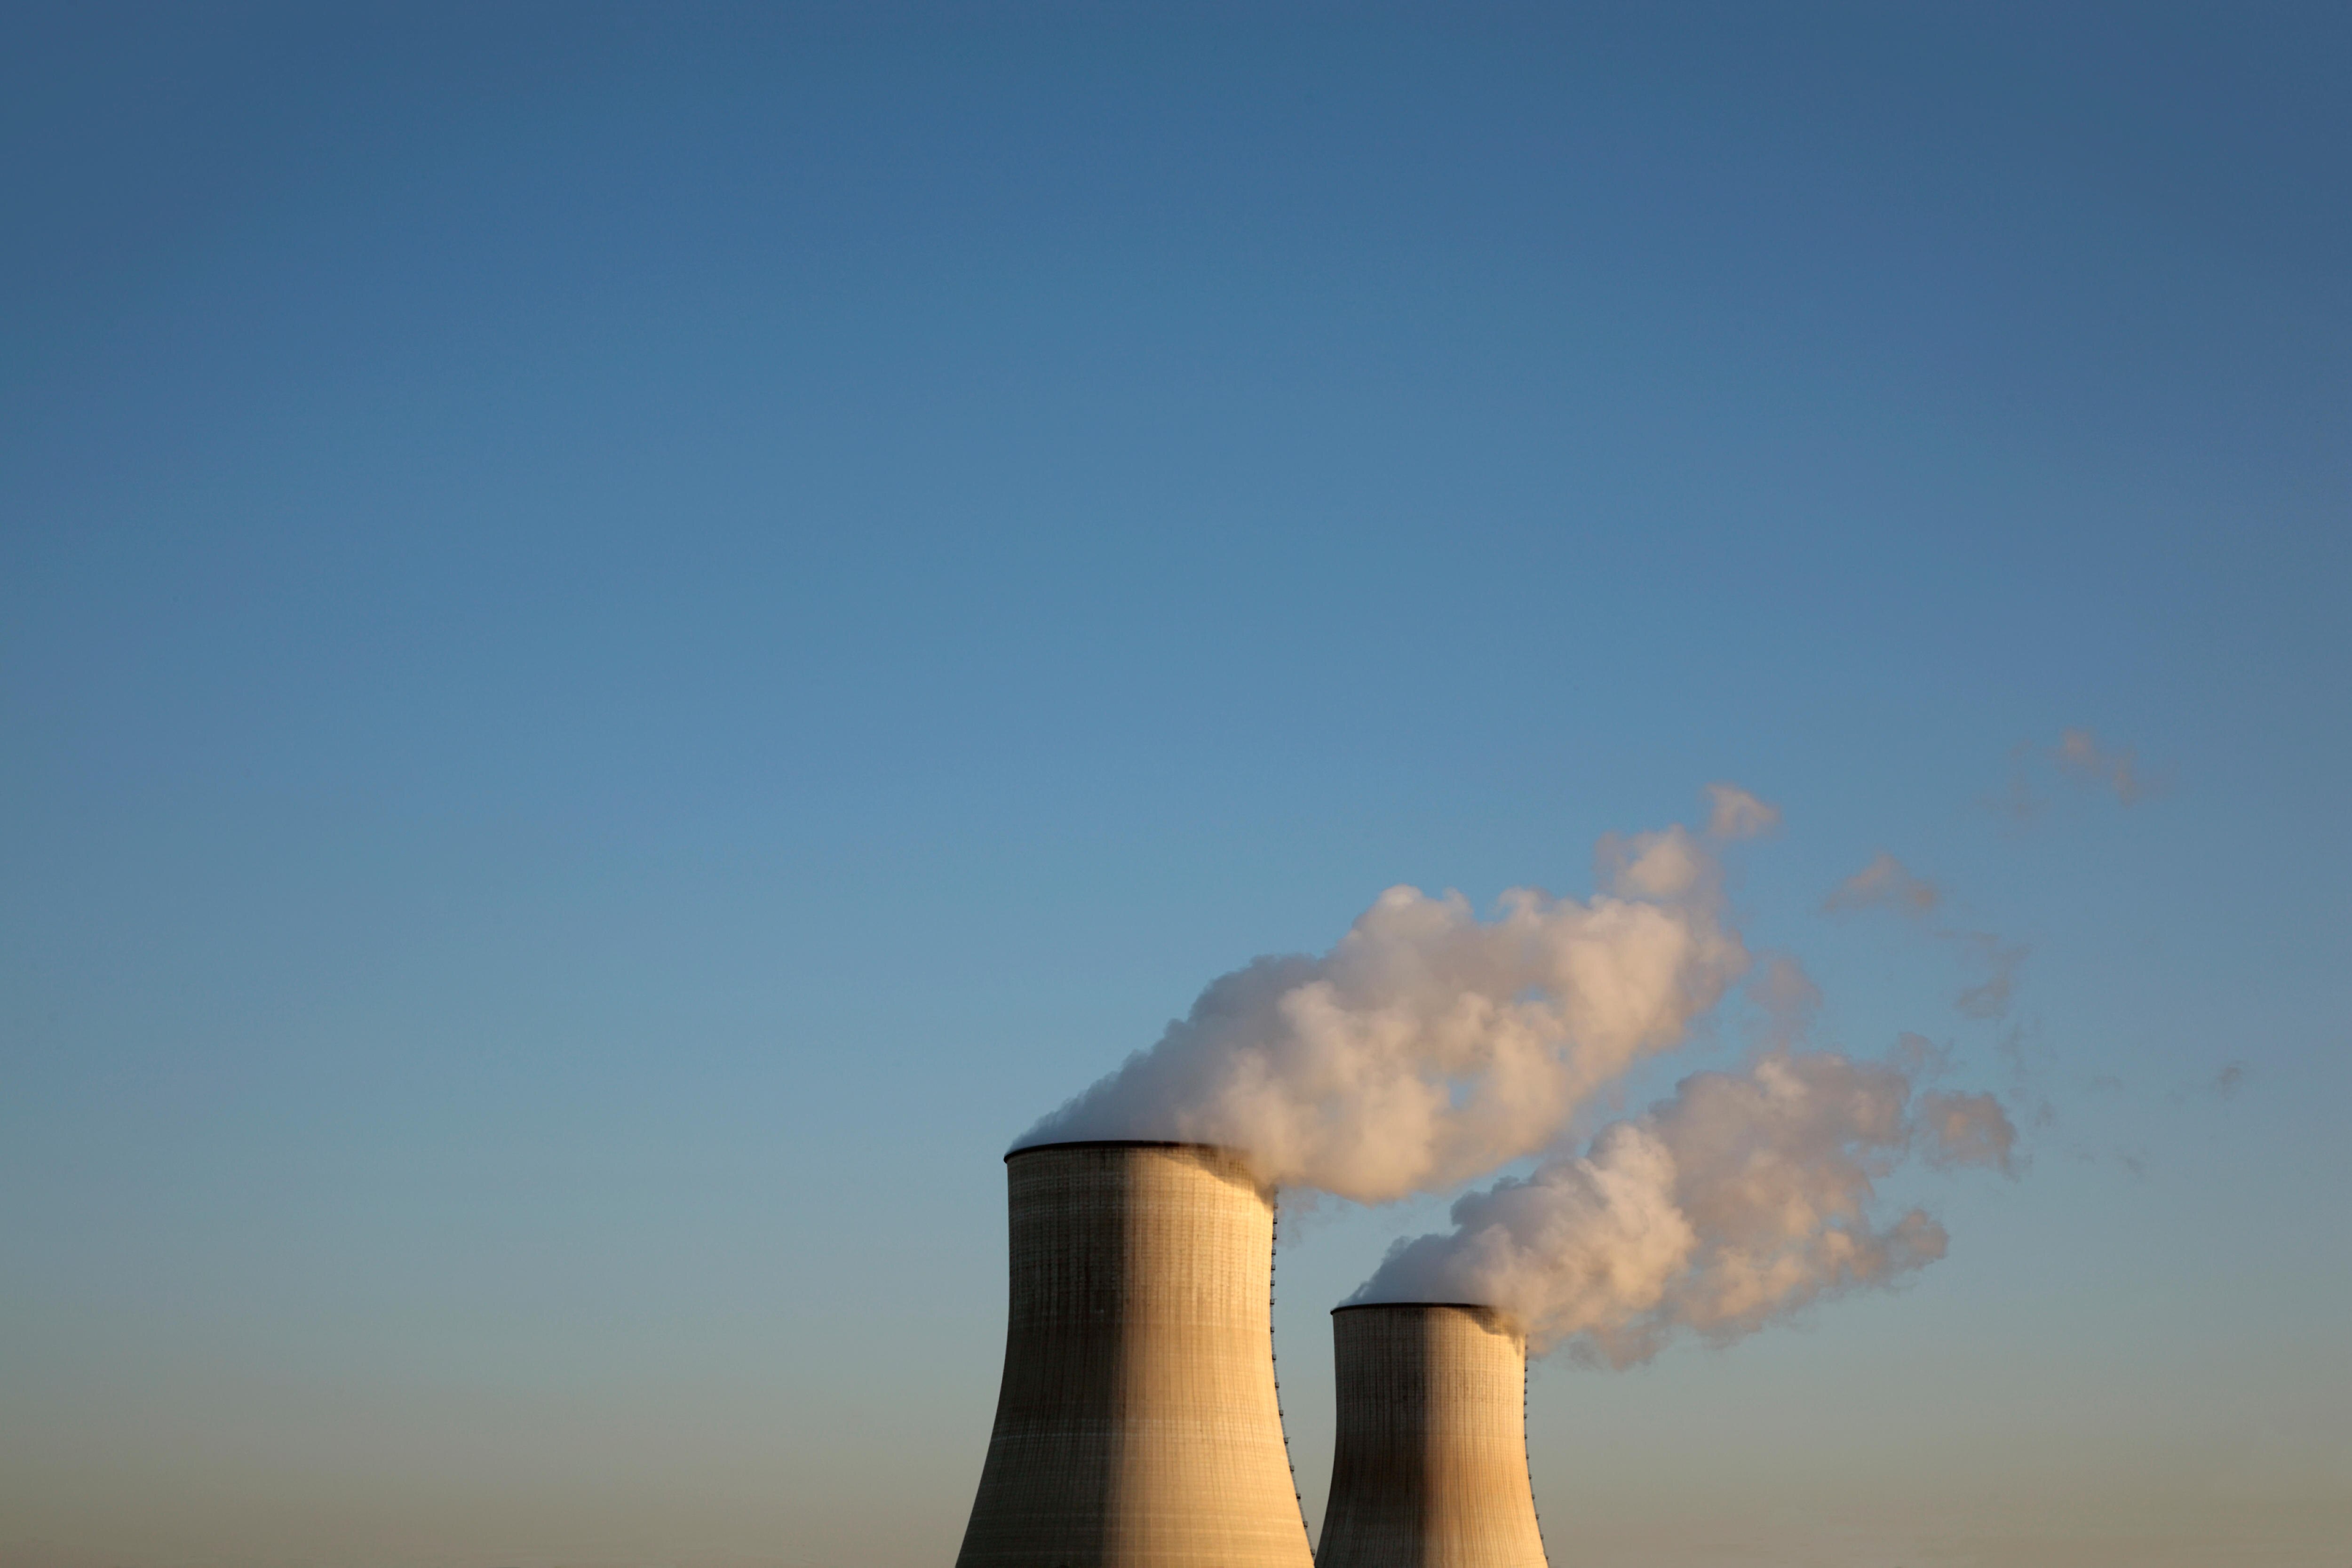 Should climate change make us rethink the ethics of nuclear energy?